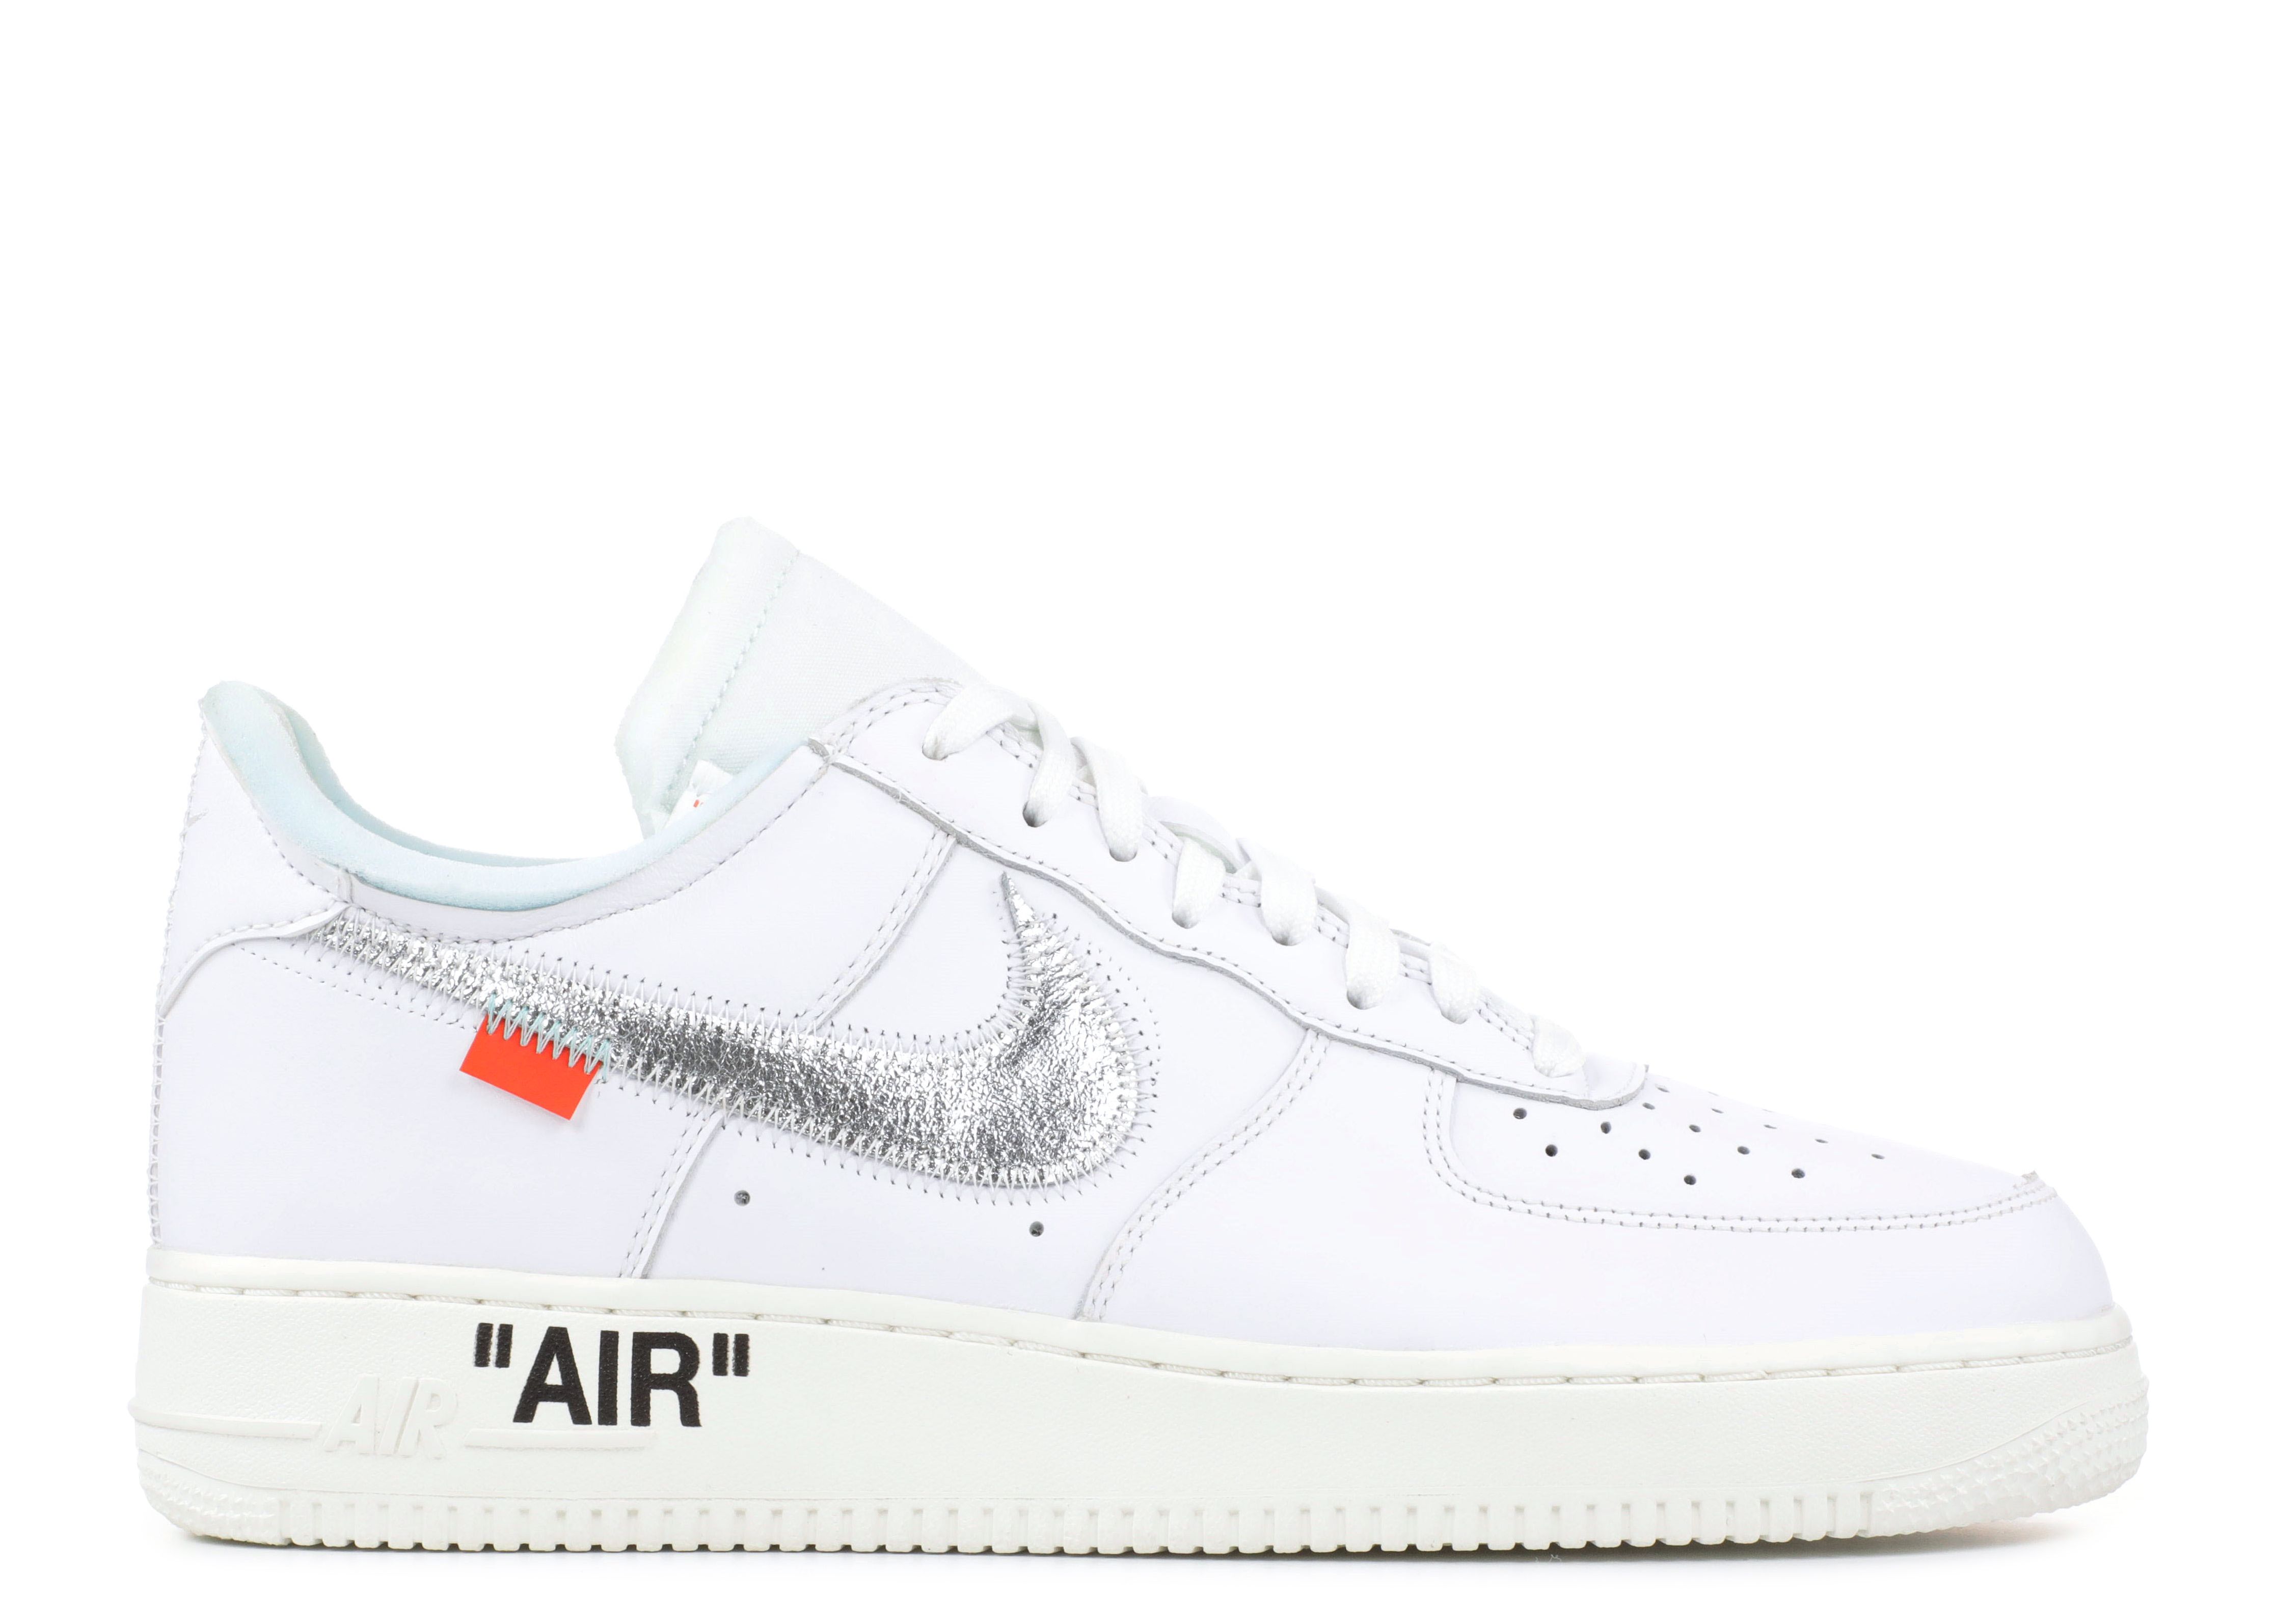 Кроссовки Nike Off-White X Air Force 1 'Complexcon Exclusive', белый air force f 35 lightning ii jet commemorative challenge coin free shipping